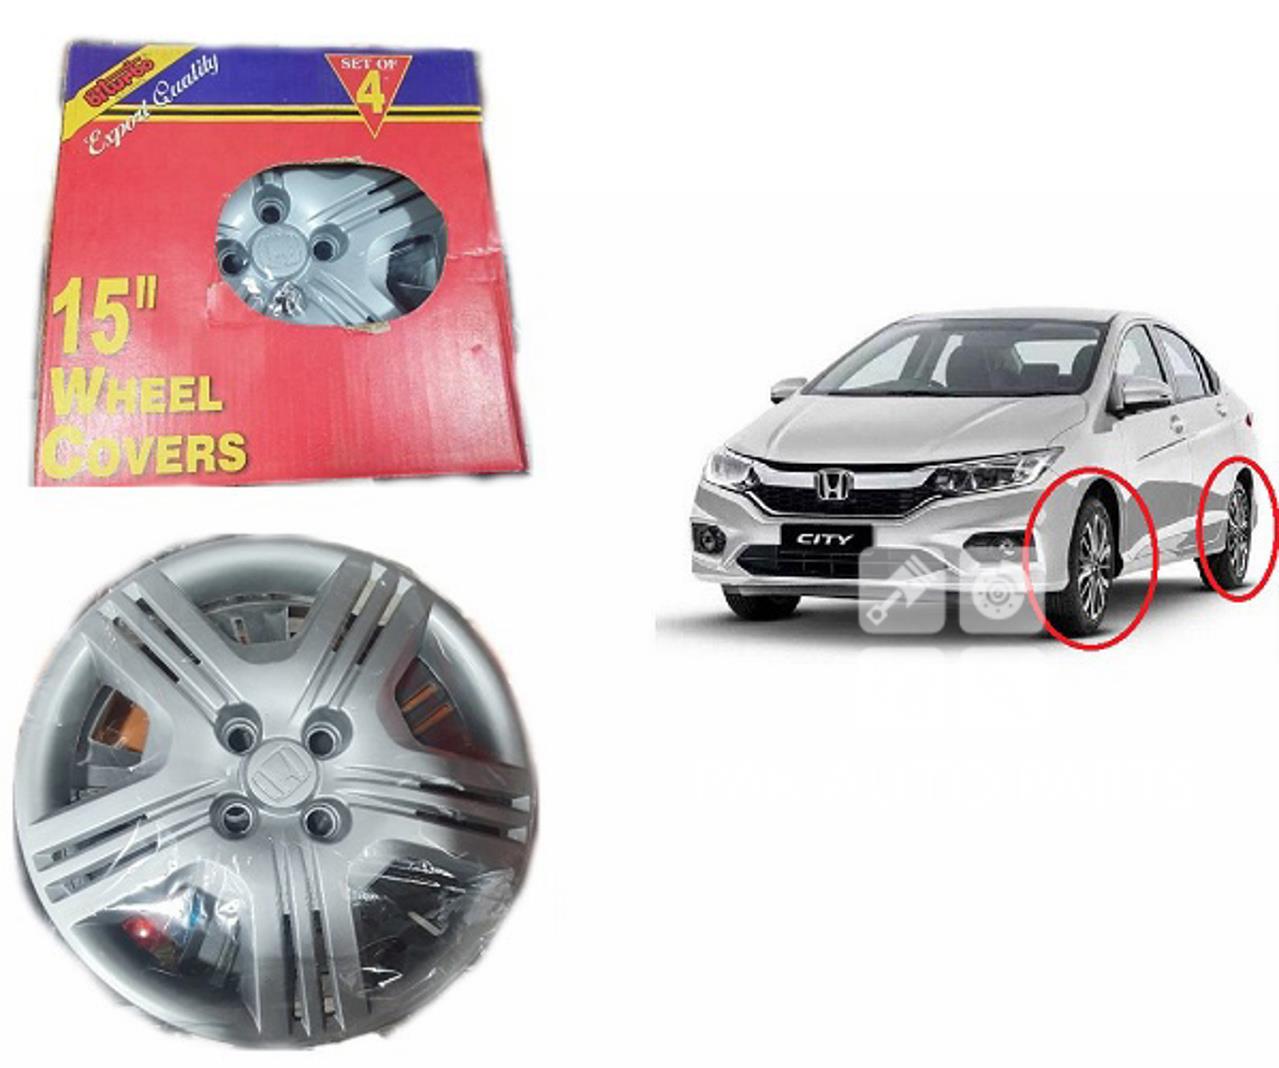 Picture of Honda City 2009-2021 "15 Inches" Wheel Cover | Genuine Fitting | Premium Quality | 4Pcs Set | Box Packed.